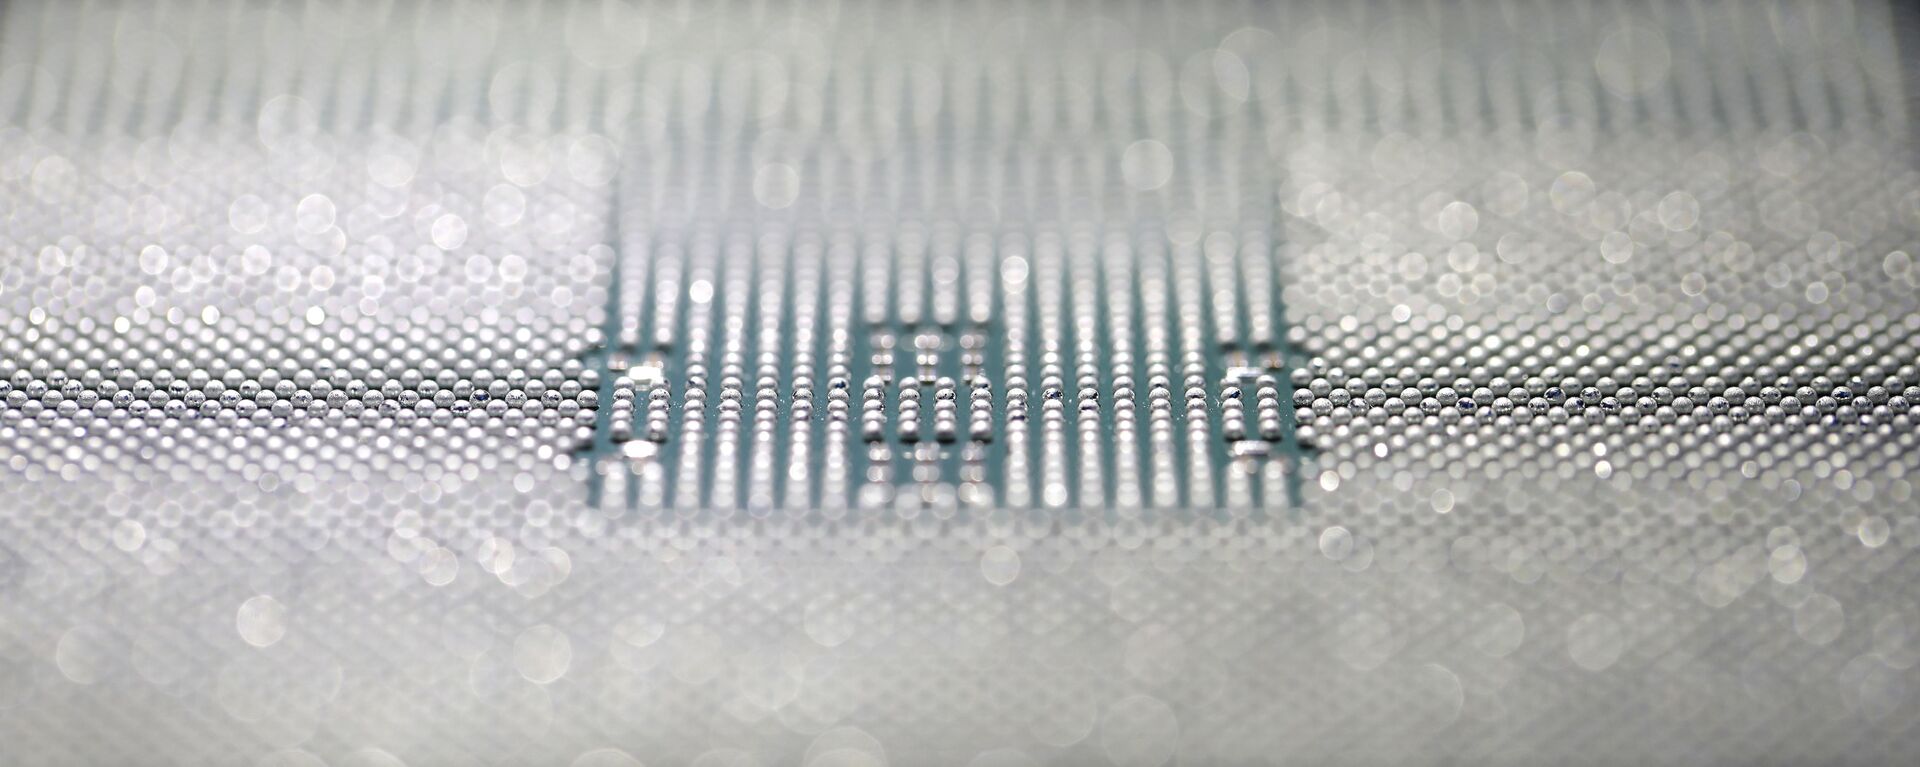 A Kunpeng 920 chip is displayed during an unveiling ceremony in Shenzhen, China, Monday, Jan. 7, 2019. Chinese telecom giant Huawei unveiled a processor chip for data centers and cloud computing as it expands into an emerging global market despite Western warnings the company might be a security risk.  - Sputnik International, 1920, 27.01.2021